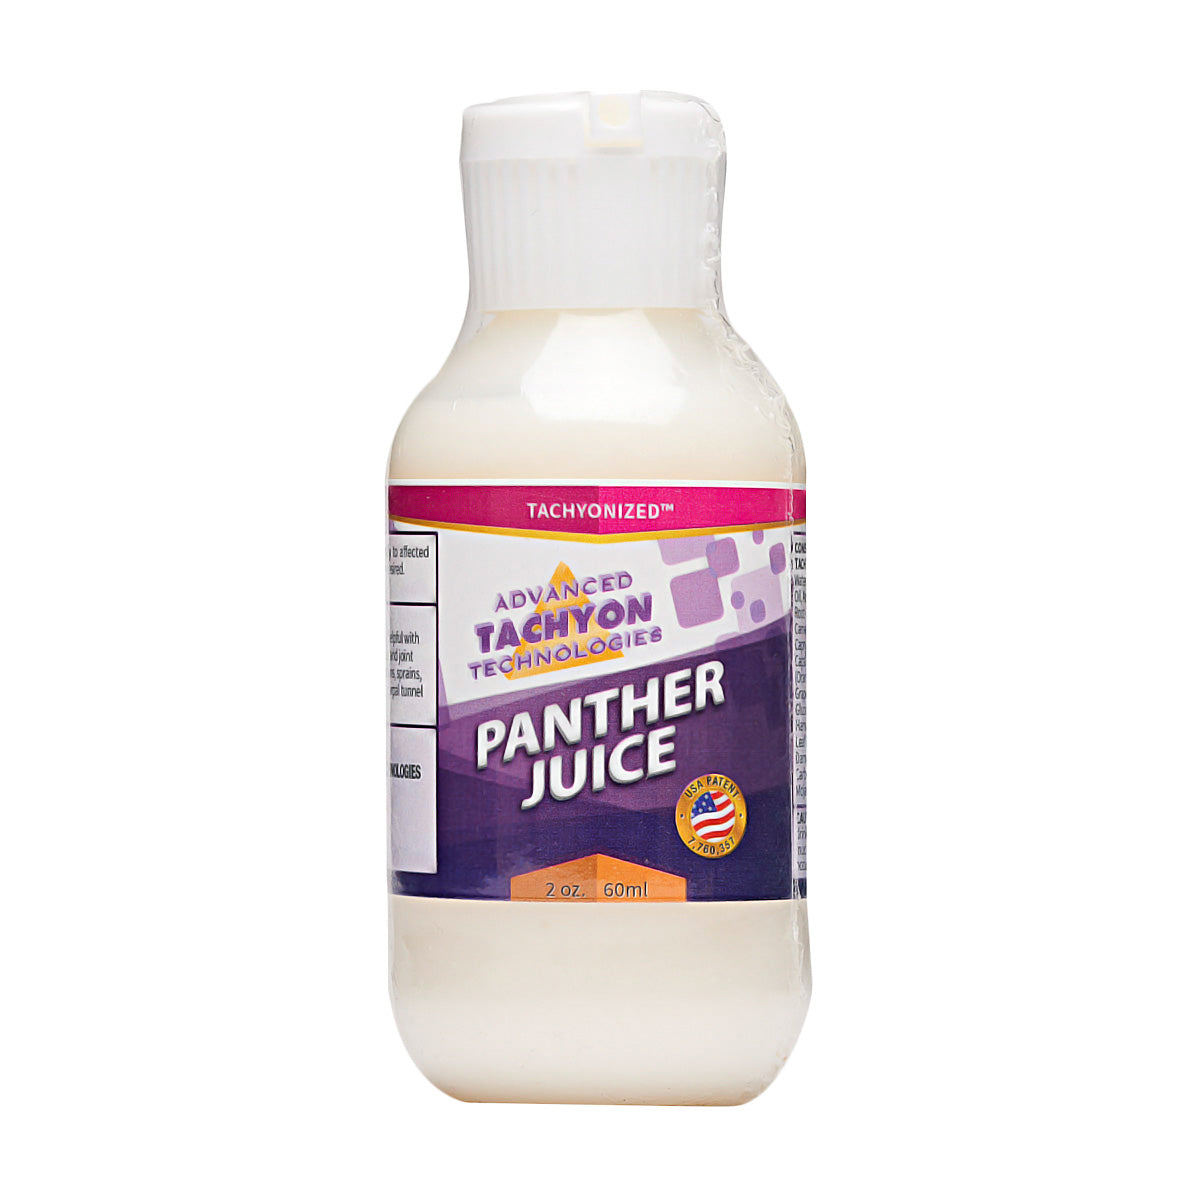 Panther Juice | ATT Tachyon | Raw Living UK | Pure Beauty | Advanced Tachyon Technologies Tachyonized Panther Juice is a blend of Aloe vera, MSM, B Vitamins, and over 200 trace elements that helps with pain &amp; swelling | Various Sizes | Roll-On